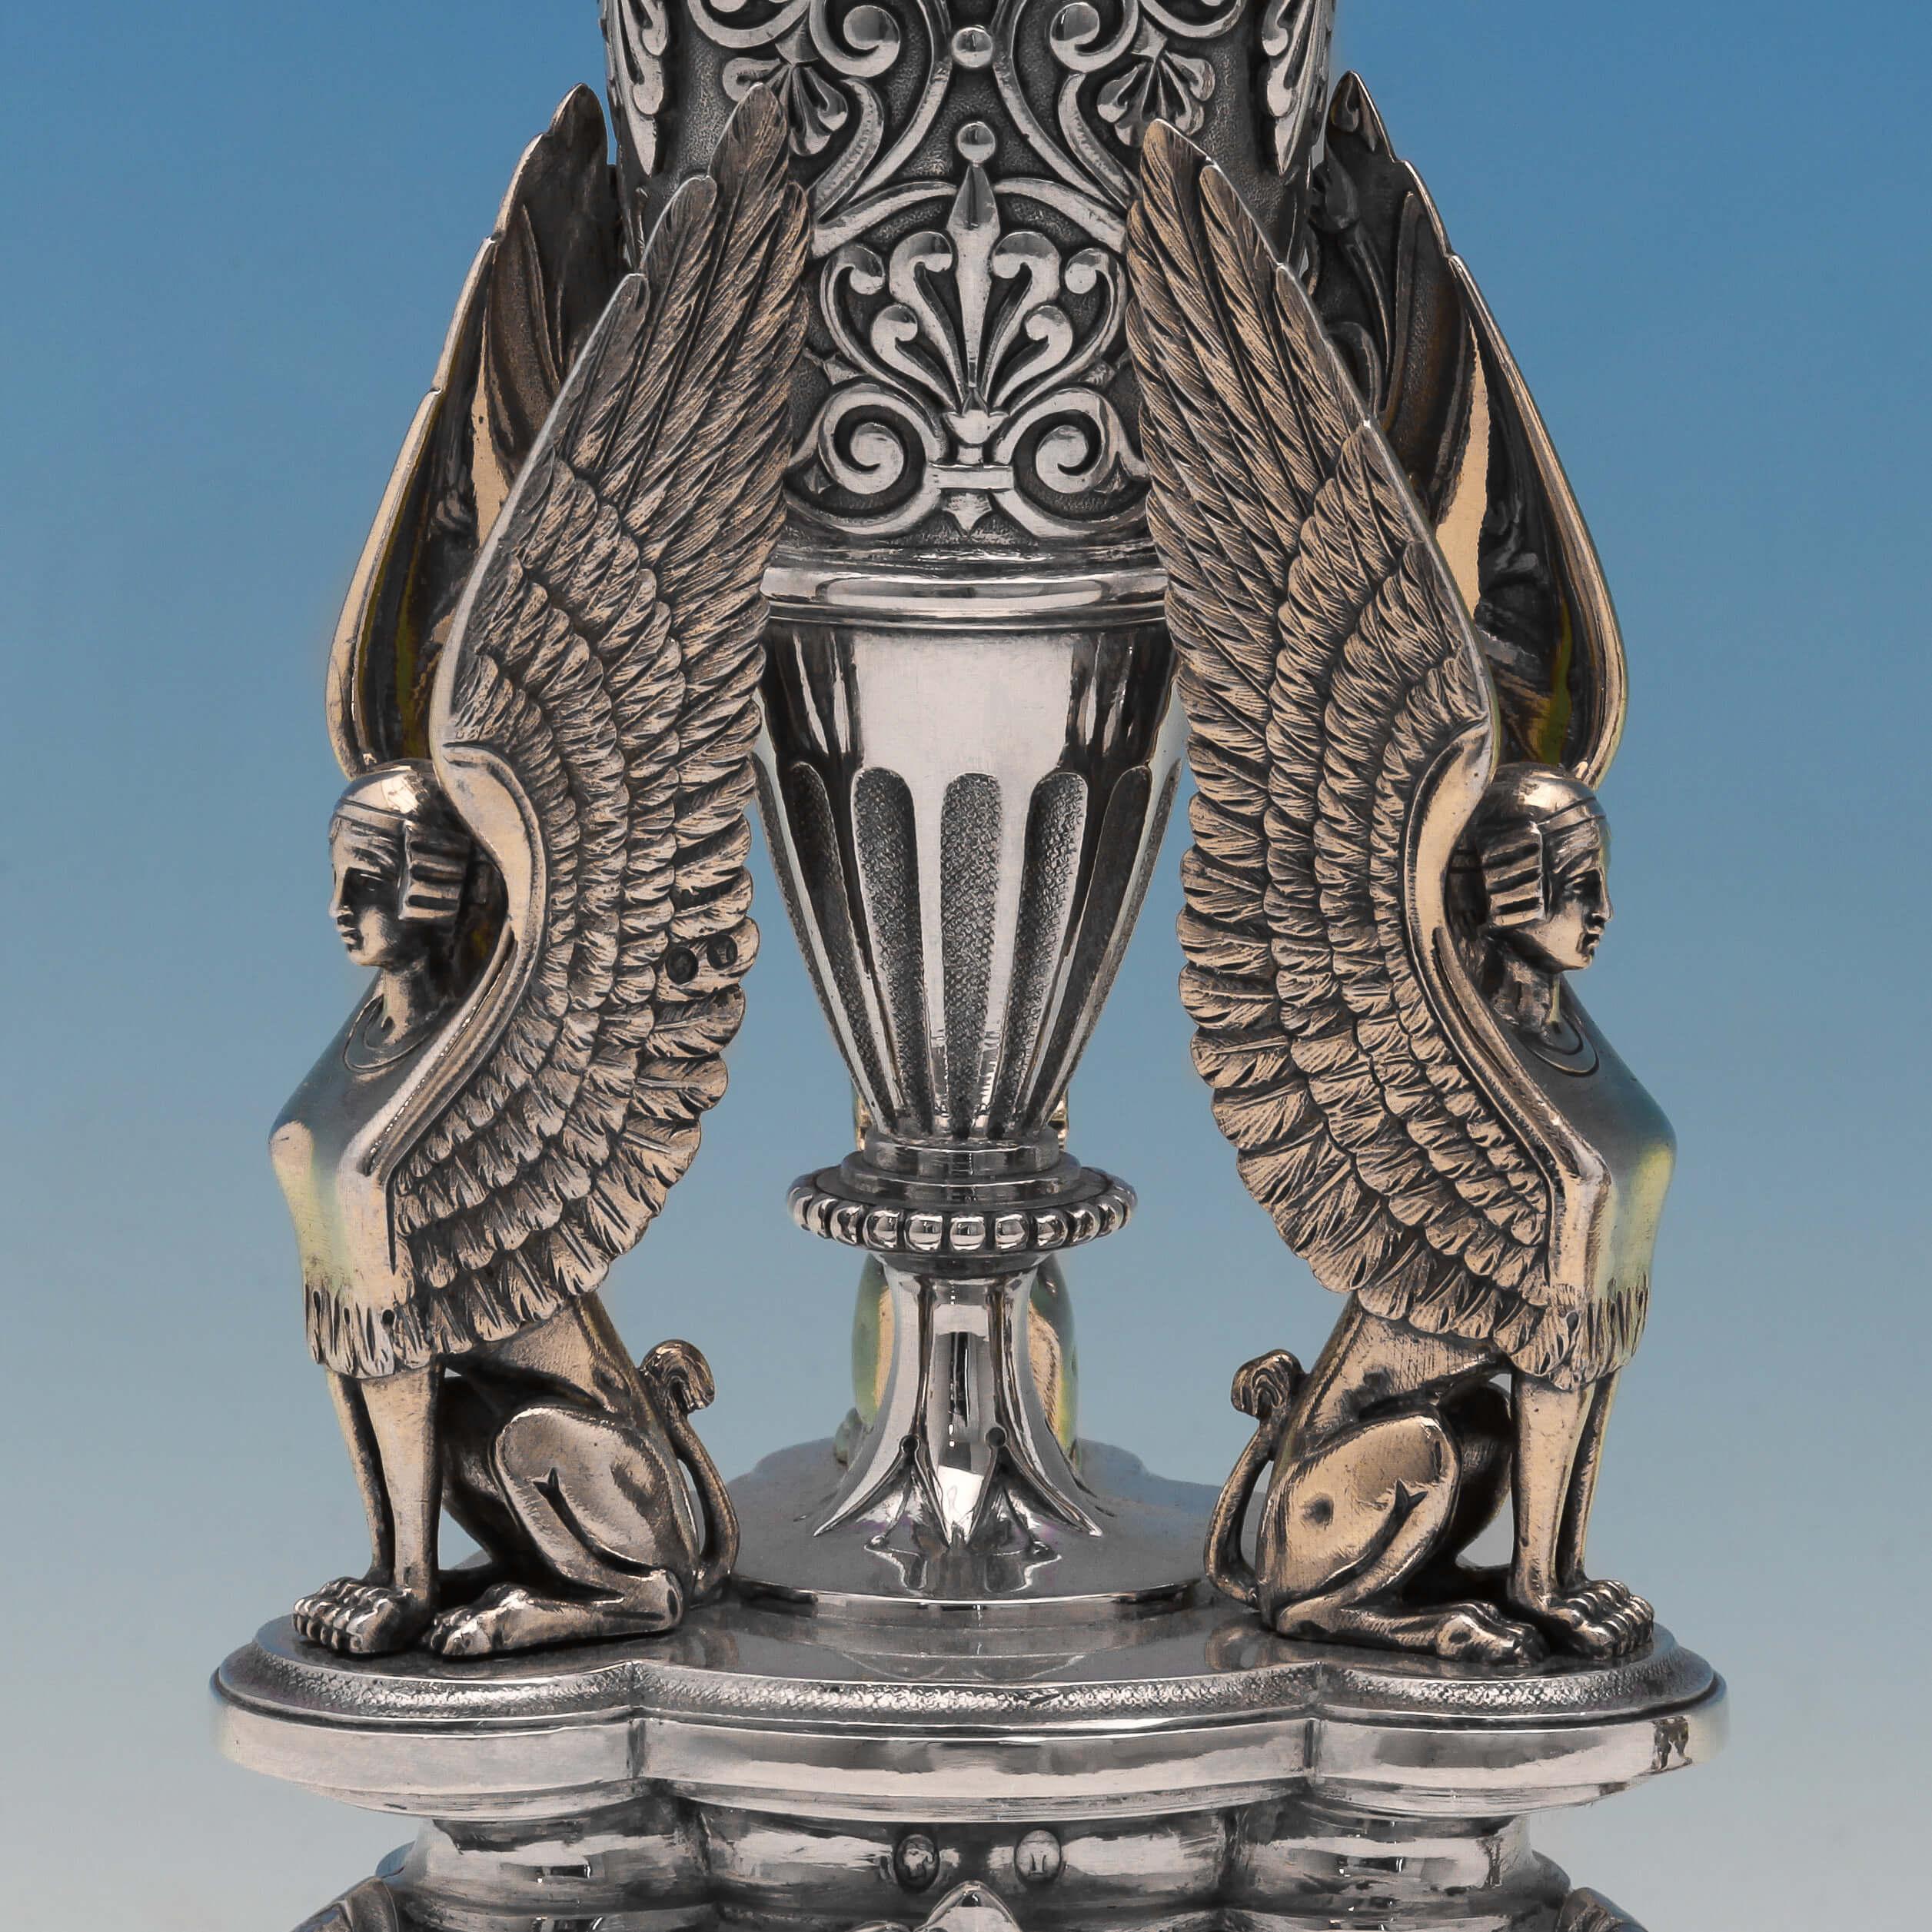 Hallmarked in Birmingham in 1873 by Elkington & Co., this superb pair of antique, Victorian, sterling silver dessert stands are in the Egyptian revival style. Three gilt figures of a Sphinx appear to hold up the central urn shaped column, which